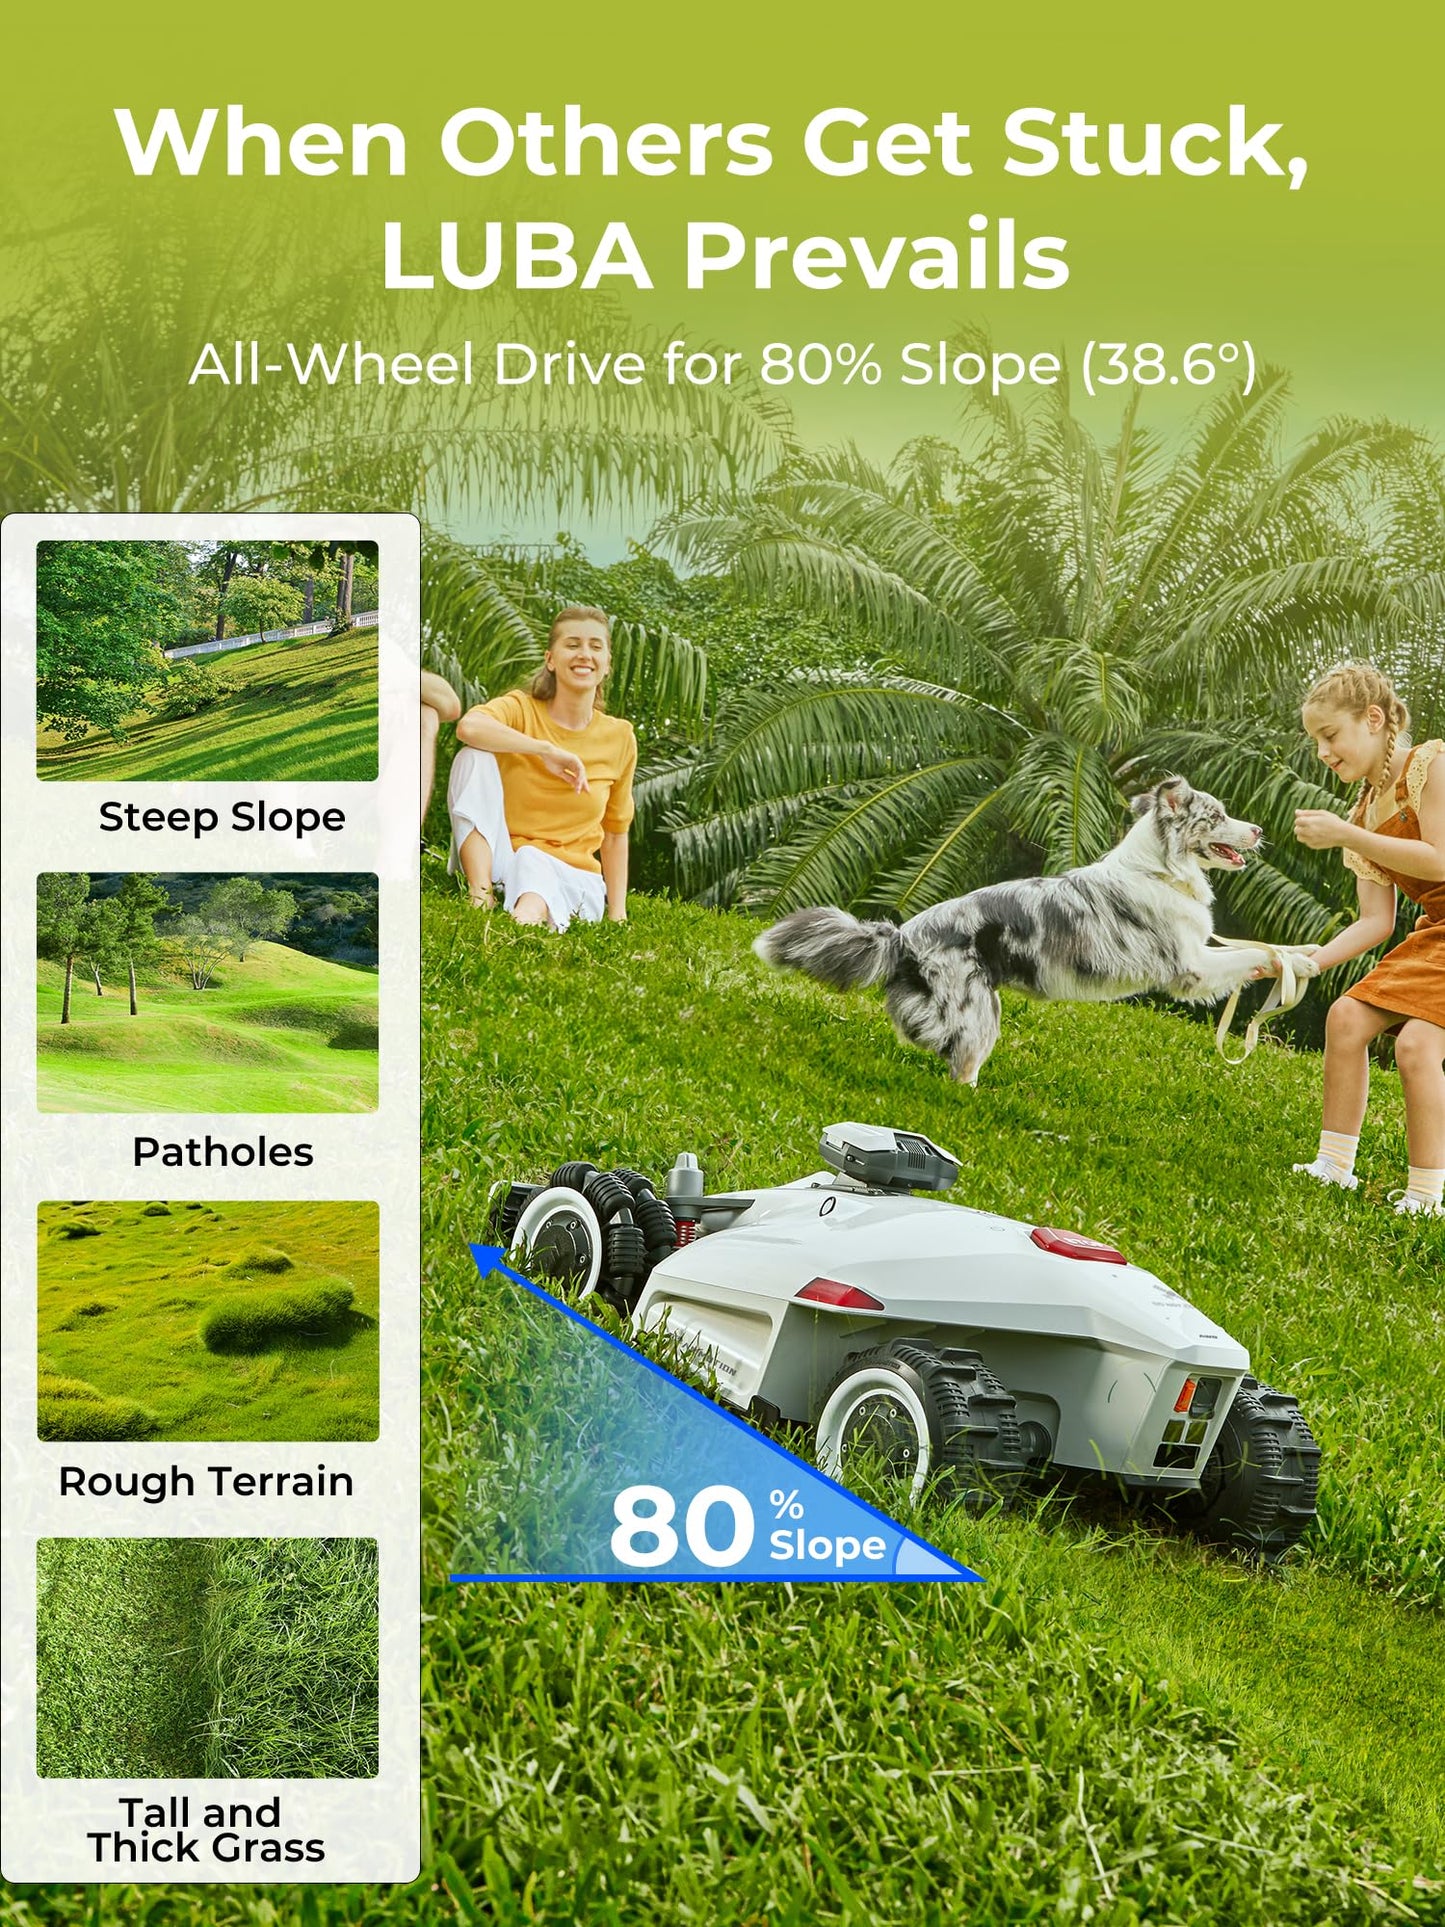 LUBA 2 AWD 5000H Robot Lawn Mower, Perimeter Wire Free Vision Robotic Lawnmower for 1.25 Acres Lawn, Cut Height 2.2"-4.0", 80% Slope, APP Control Compatible with Alexa, All-Wheel Drive, Anti-Theft